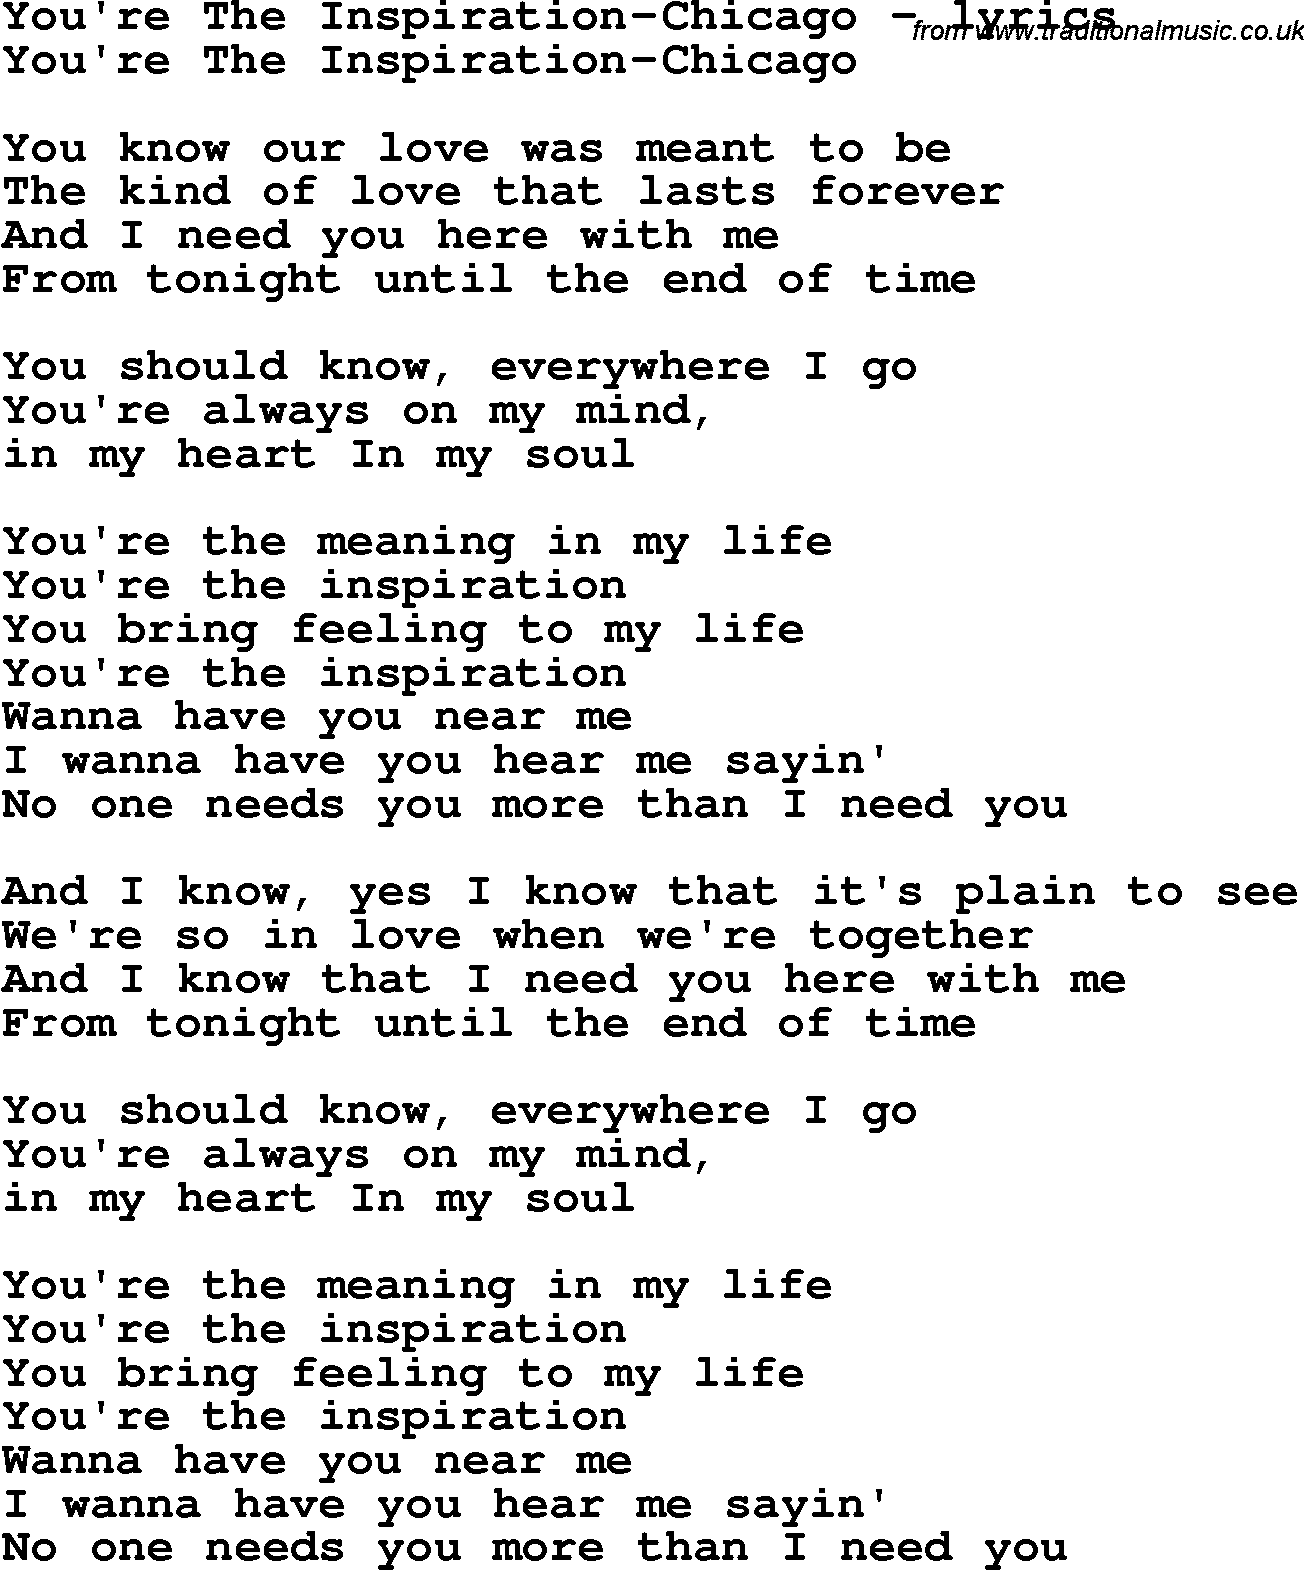 Love Song Lyrics for: You're The Inspiration-Chicago